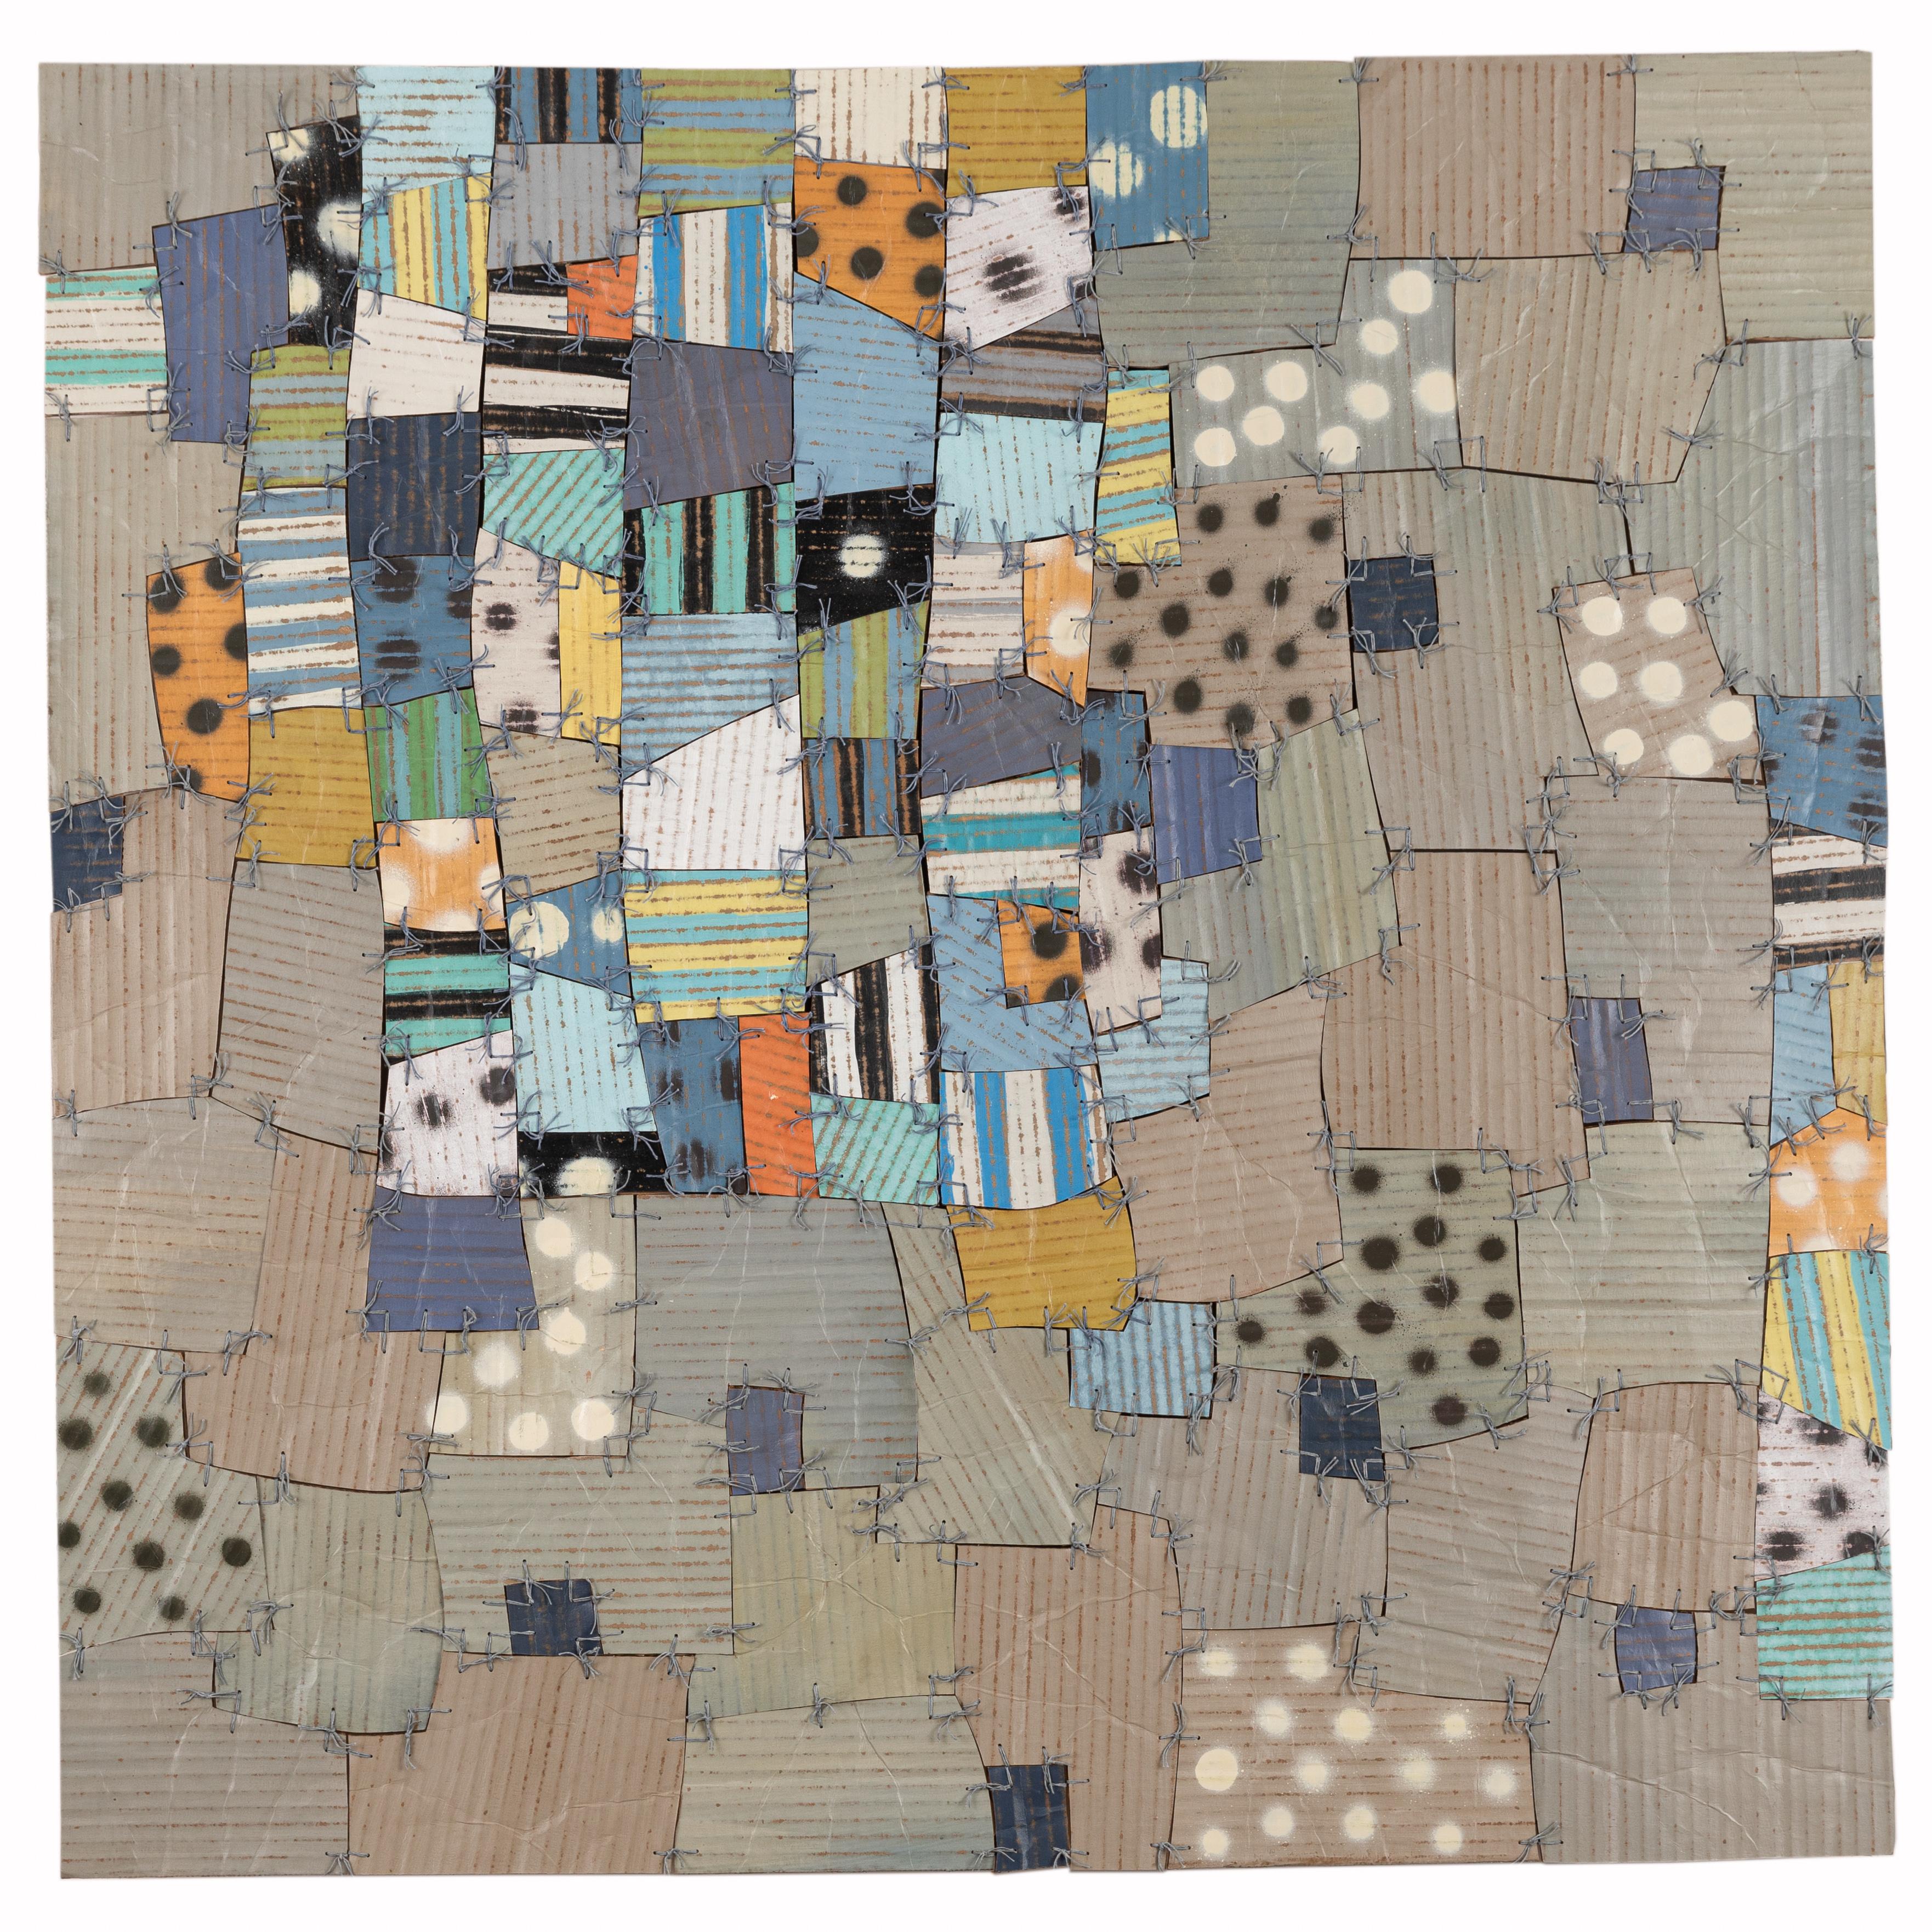 "Elusive Sleep" - a Contemporary, Colorful, Eclectic, Hand-Sewn Cardboard Quilt